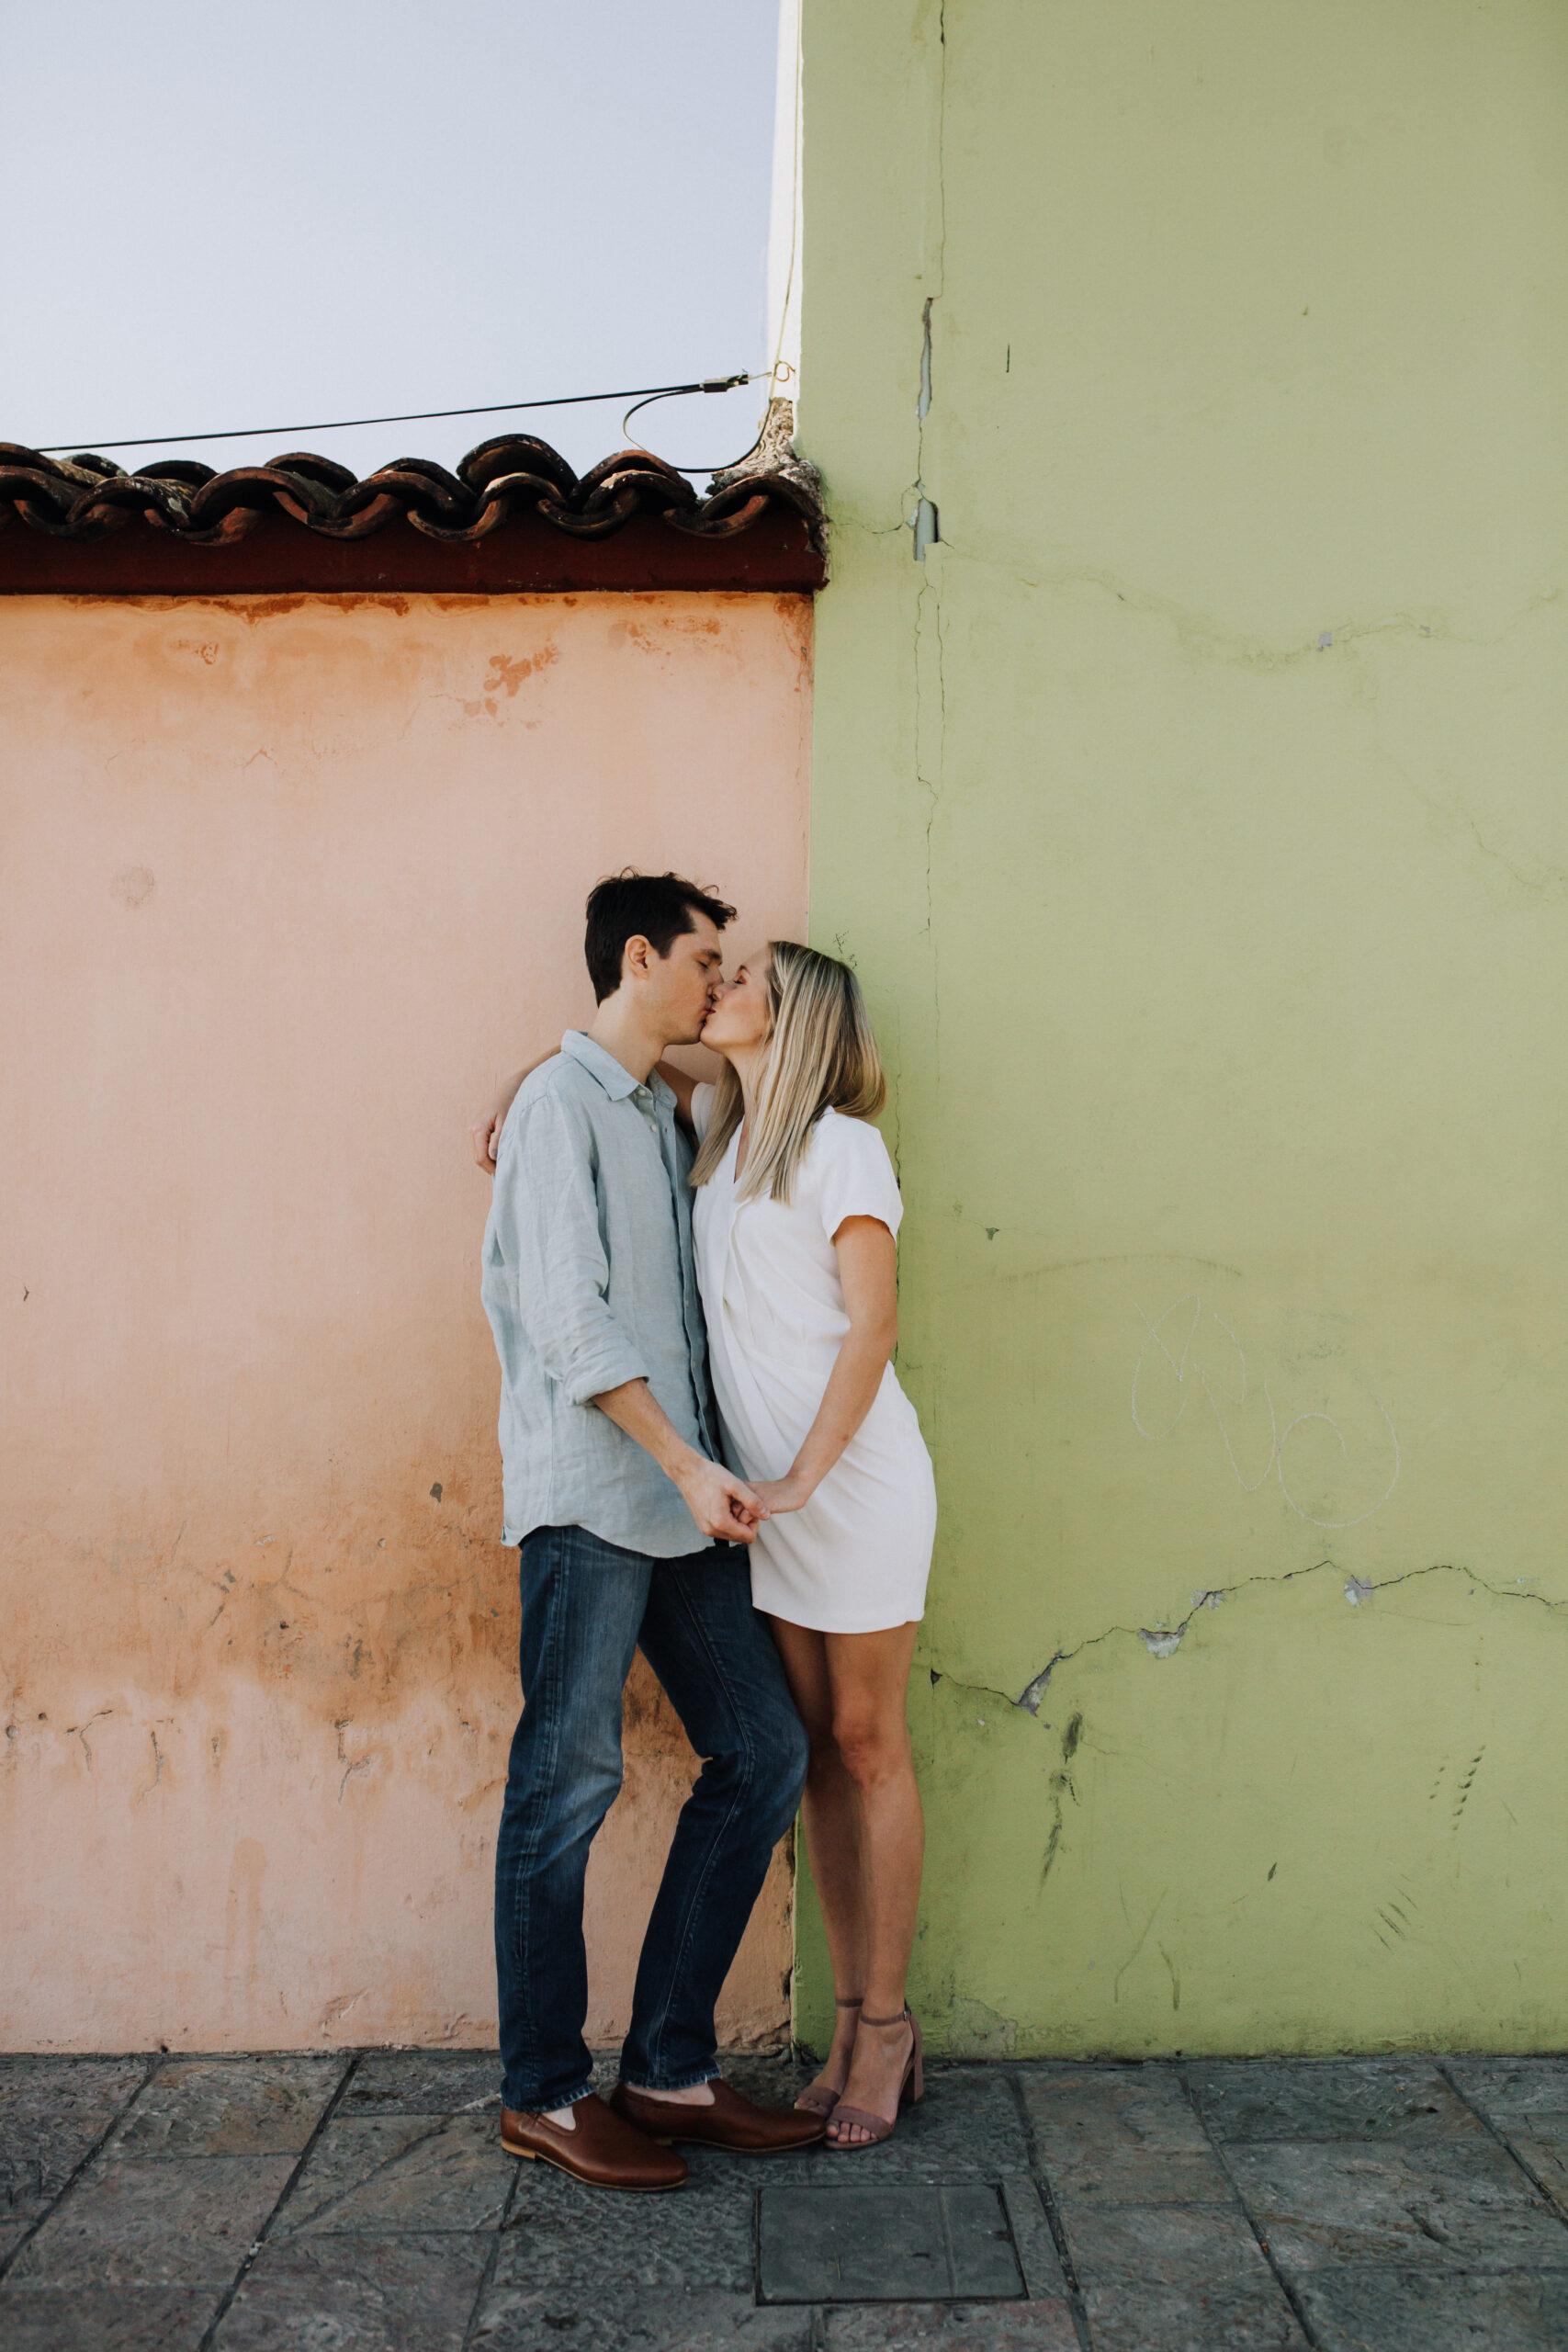 stunning bride and groom pose against a green and orange wall during their dreamy Oaxaca engagement photoshoot